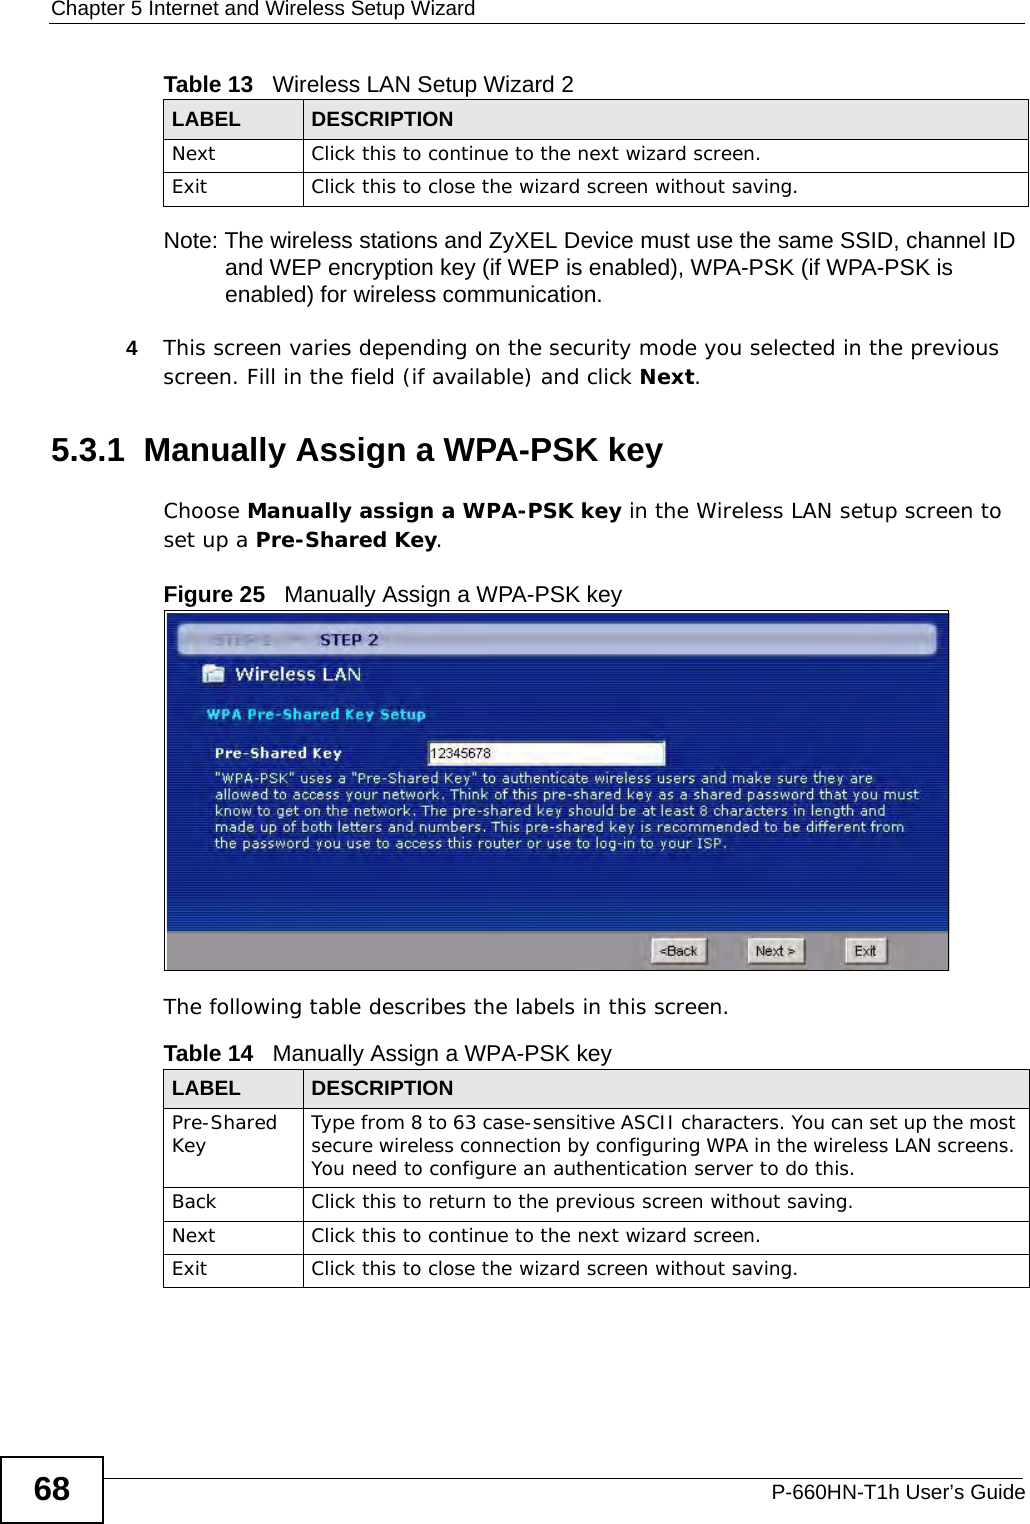 Chapter 5 Internet and Wireless Setup WizardP-660HN-T1h User’s Guide68Note: The wireless stations and ZyXEL Device must use the same SSID, channel ID and WEP encryption key (if WEP is enabled), WPA-PSK (if WPA-PSK is enabled) for wireless communication.4This screen varies depending on the security mode you selected in the previous screen. Fill in the field (if available) and click Next.5.3.1  Manually Assign a WPA-PSK keyChoose Manually assign a WPA-PSK key in the Wireless LAN setup screen to set up a Pre-Shared Key.Figure 25   Manually Assign a WPA-PSK keyThe following table describes the labels in this screen. Next Click this to continue to the next wizard screen.Exit Click this to close the wizard screen without saving.Table 13   Wireless LAN Setup Wizard 2LABEL DESCRIPTIONTable 14   Manually Assign a WPA-PSK keyLABEL DESCRIPTIONPre-Shared Key Type from 8 to 63 case-sensitive ASCII characters. You can set up the most secure wireless connection by configuring WPA in the wireless LAN screens. You need to configure an authentication server to do this.Back Click this to return to the previous screen without saving.Next Click this to continue to the next wizard screen.Exit Click this to close the wizard screen without saving.